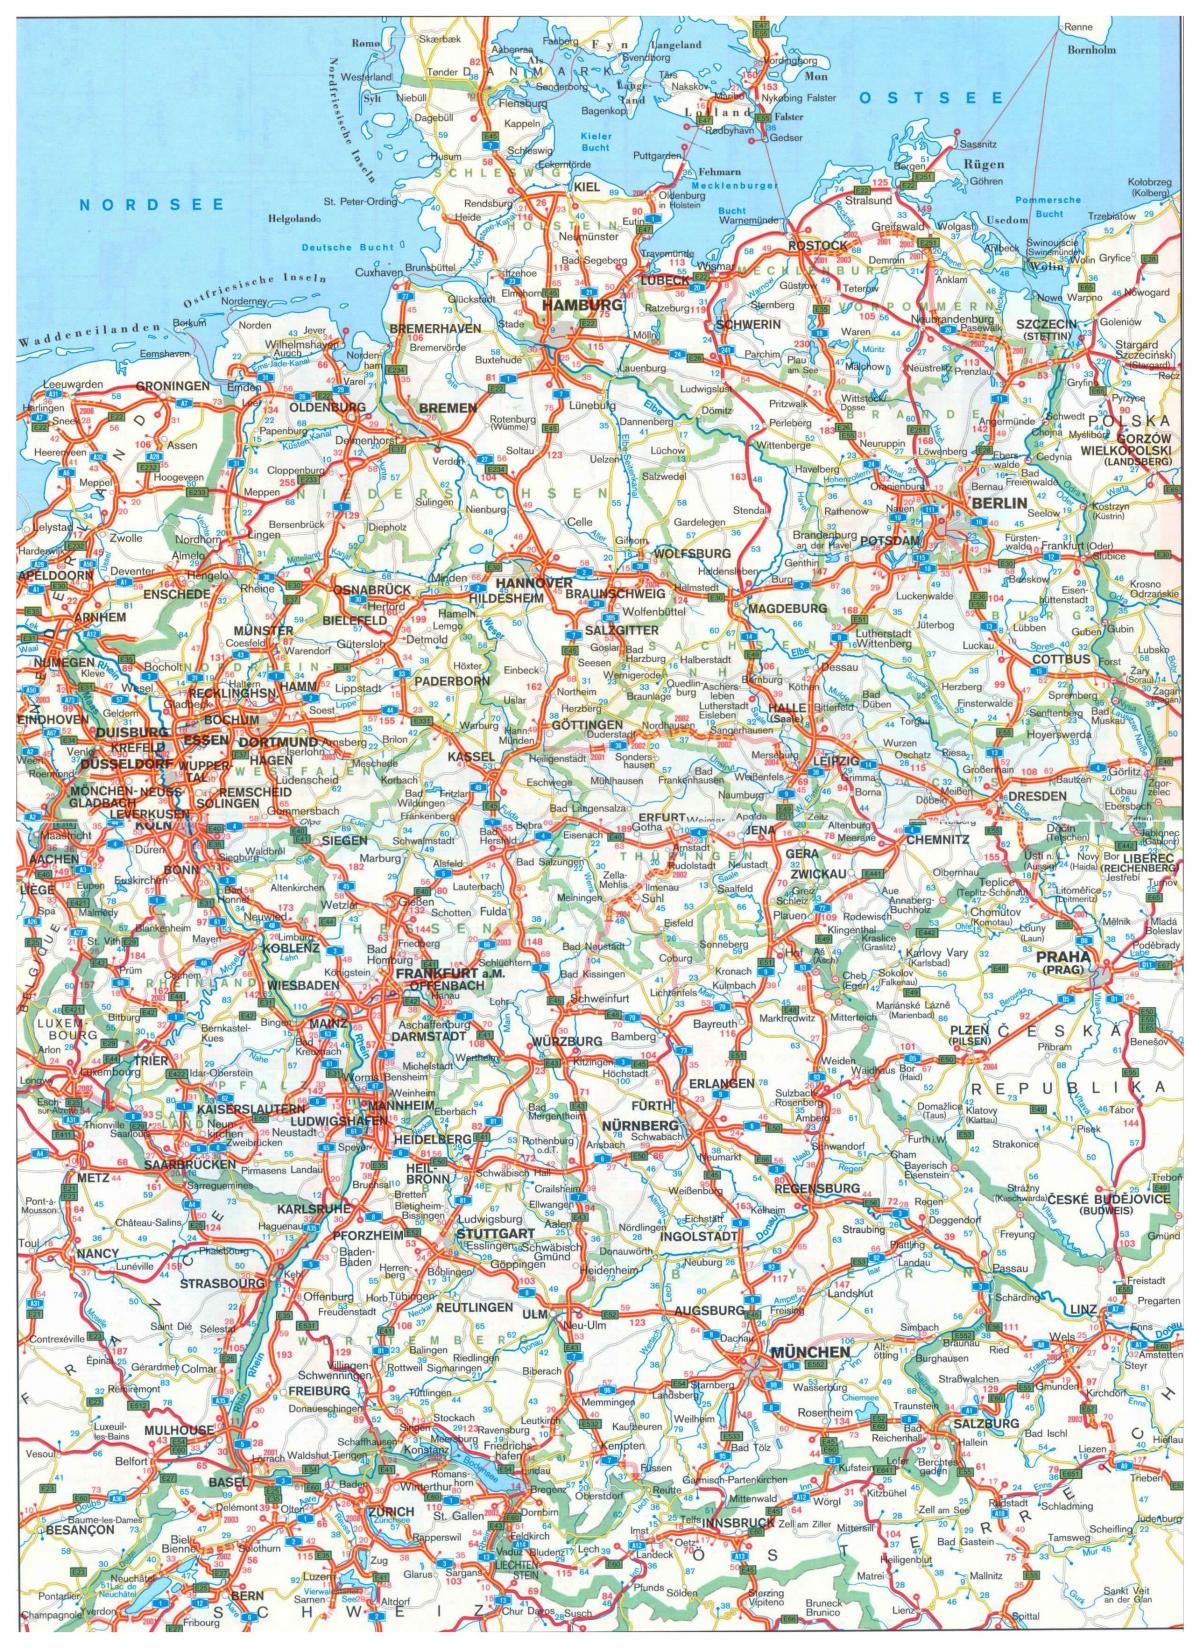 Driving map of Germany